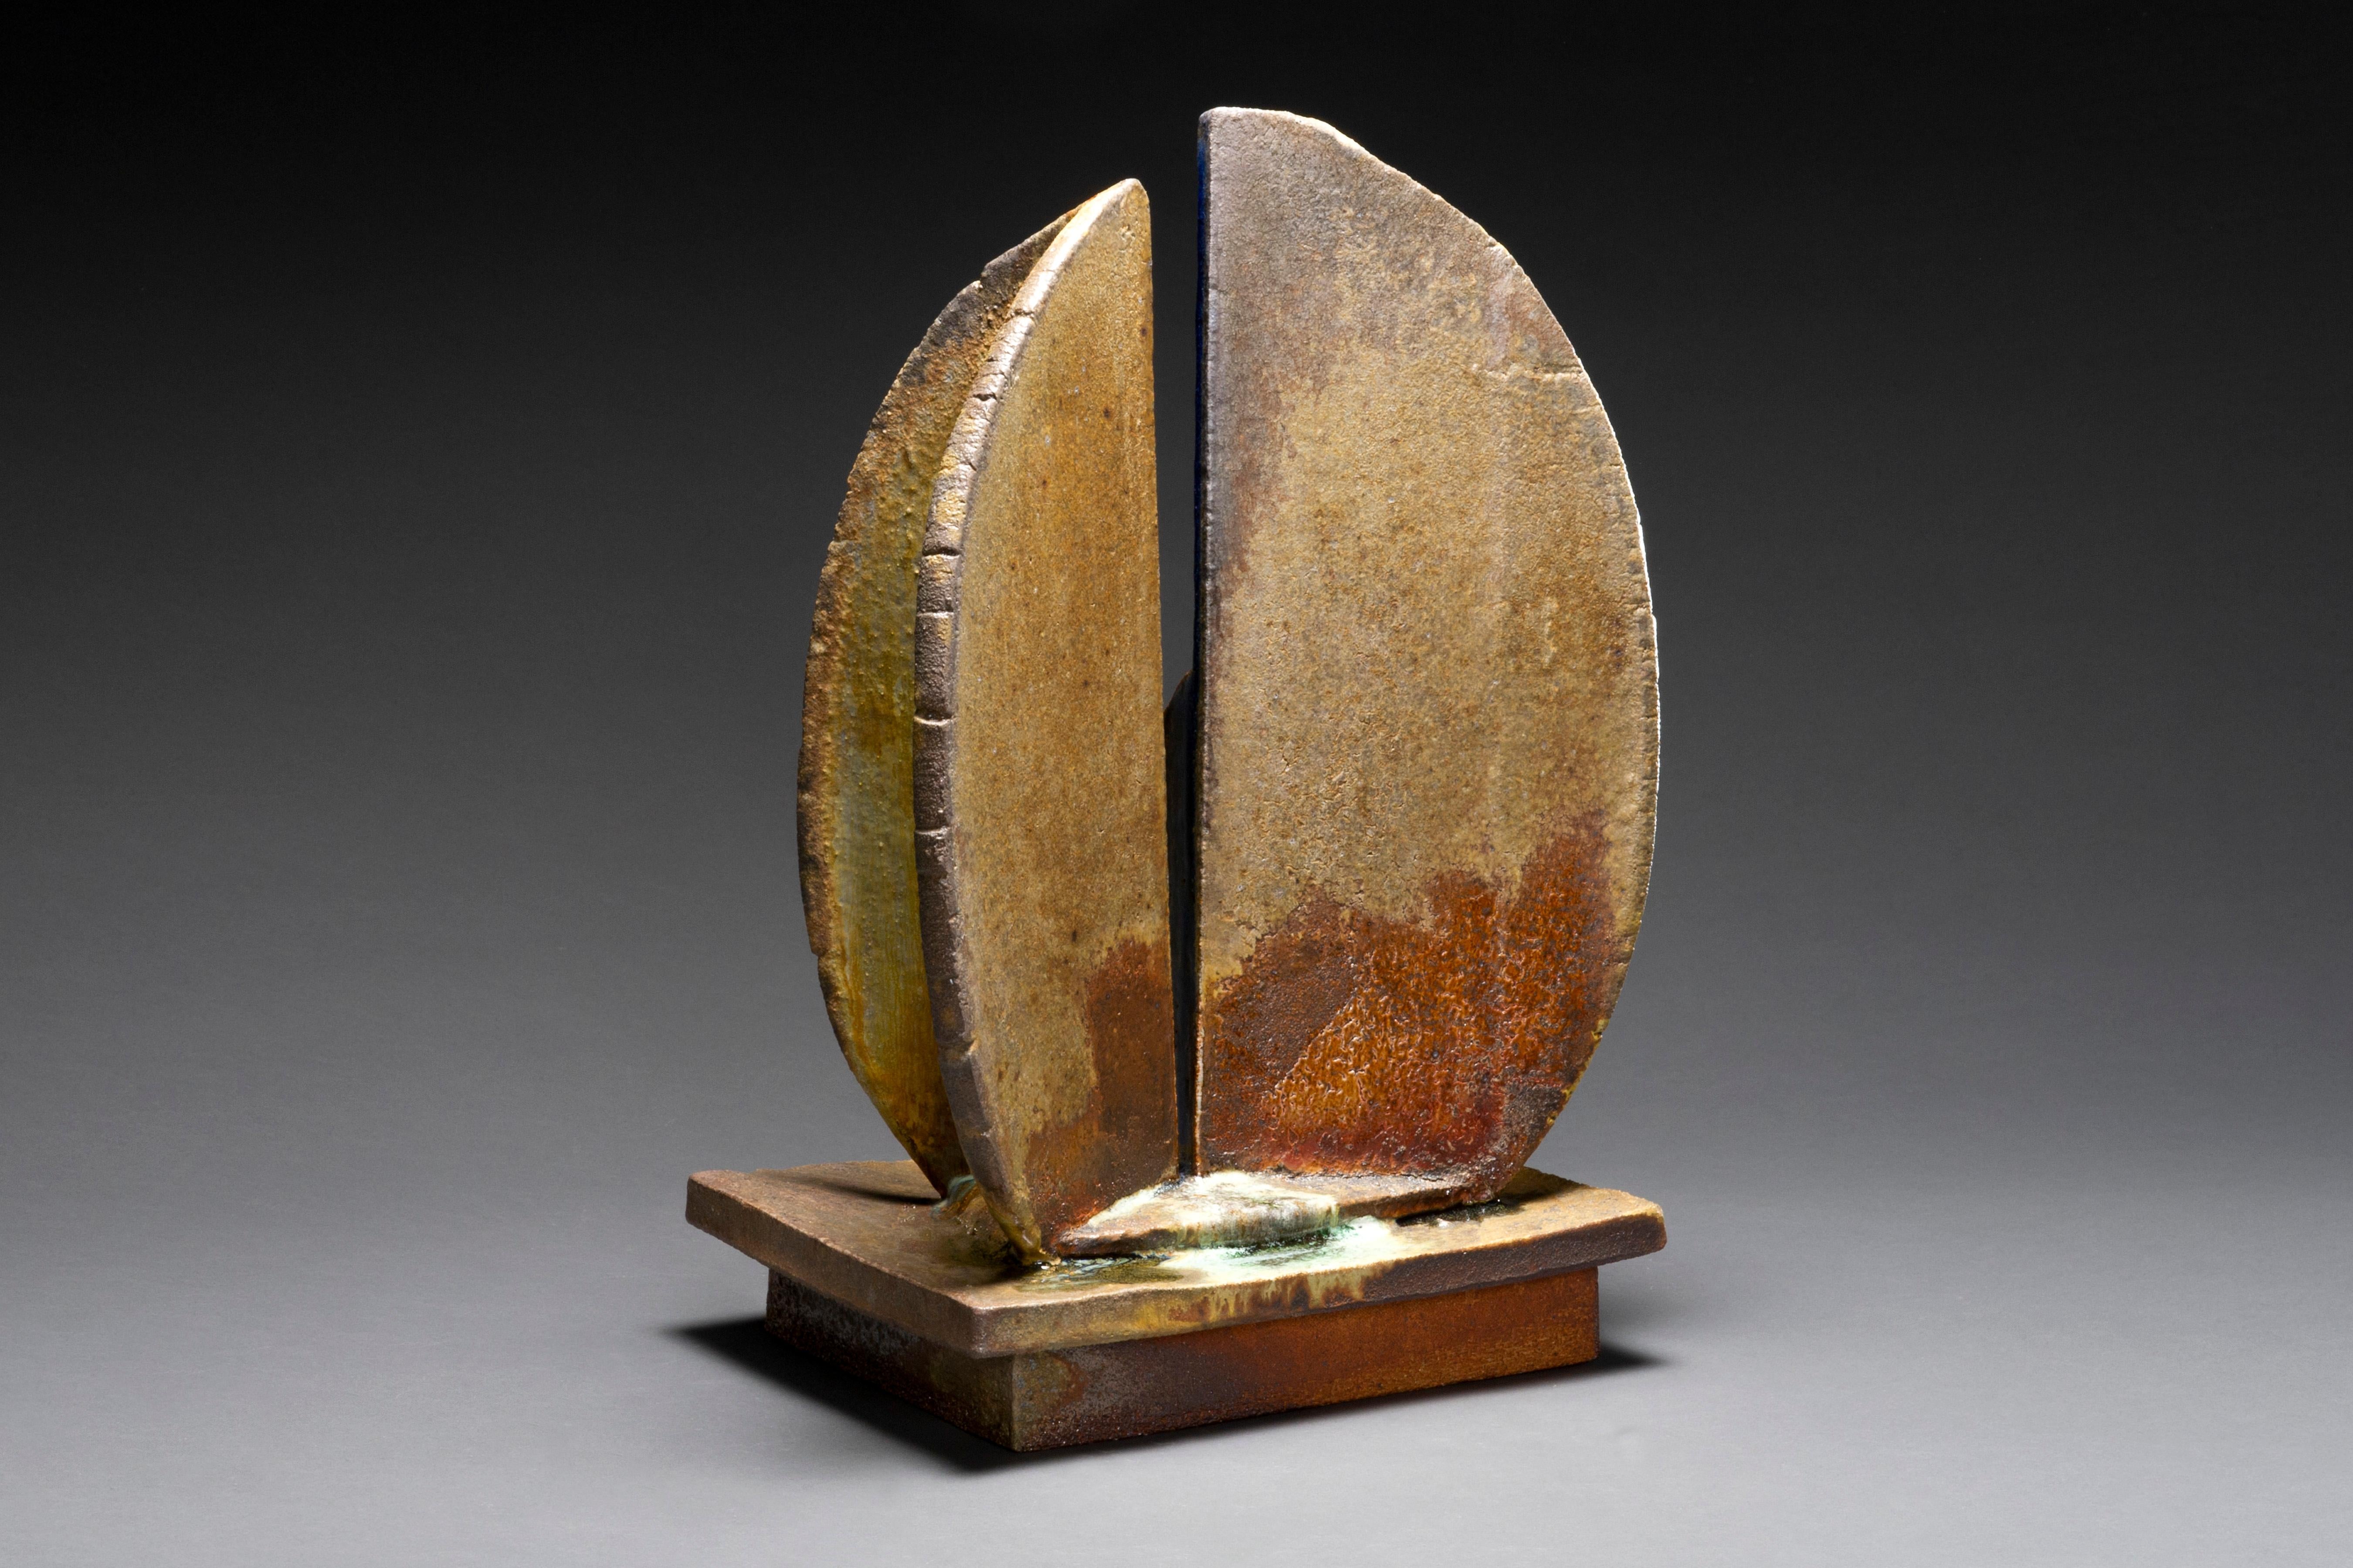 Wood-fired ceramic abstract sculpture: 'Four' - Contemporary Sculpture by Tony Moore